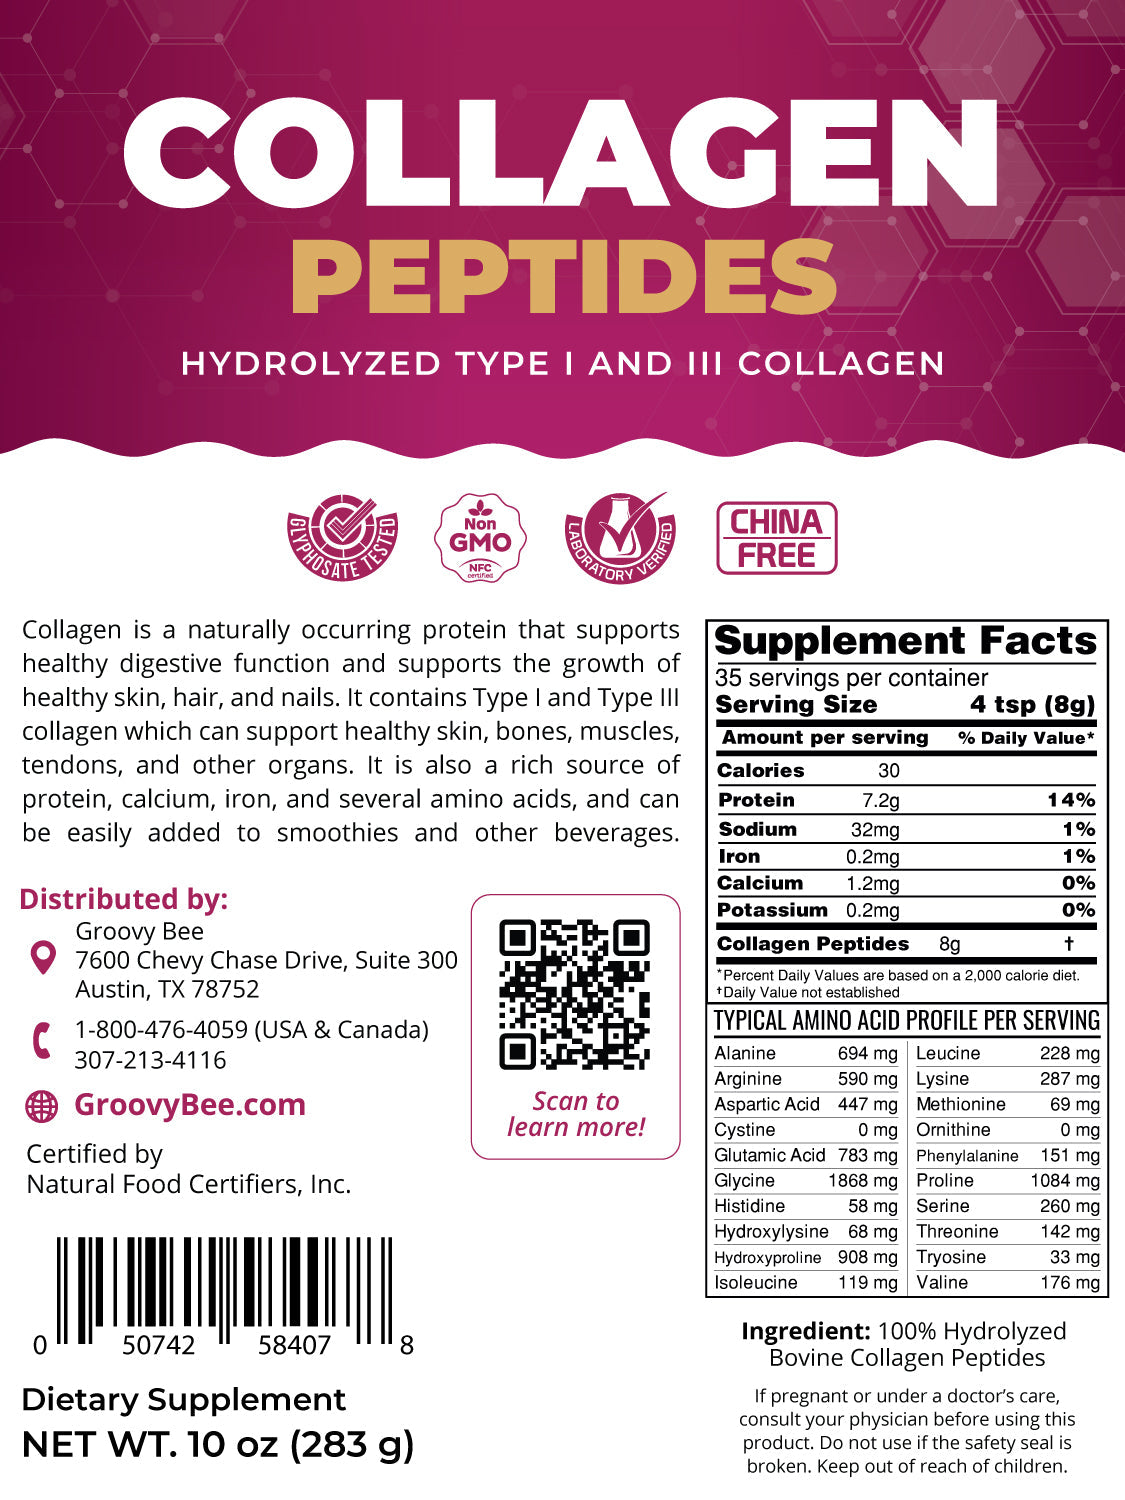 Groovy Bee® Collagen Peptides - Hydrolyzed Type I and III Collagen 10oz (283g)